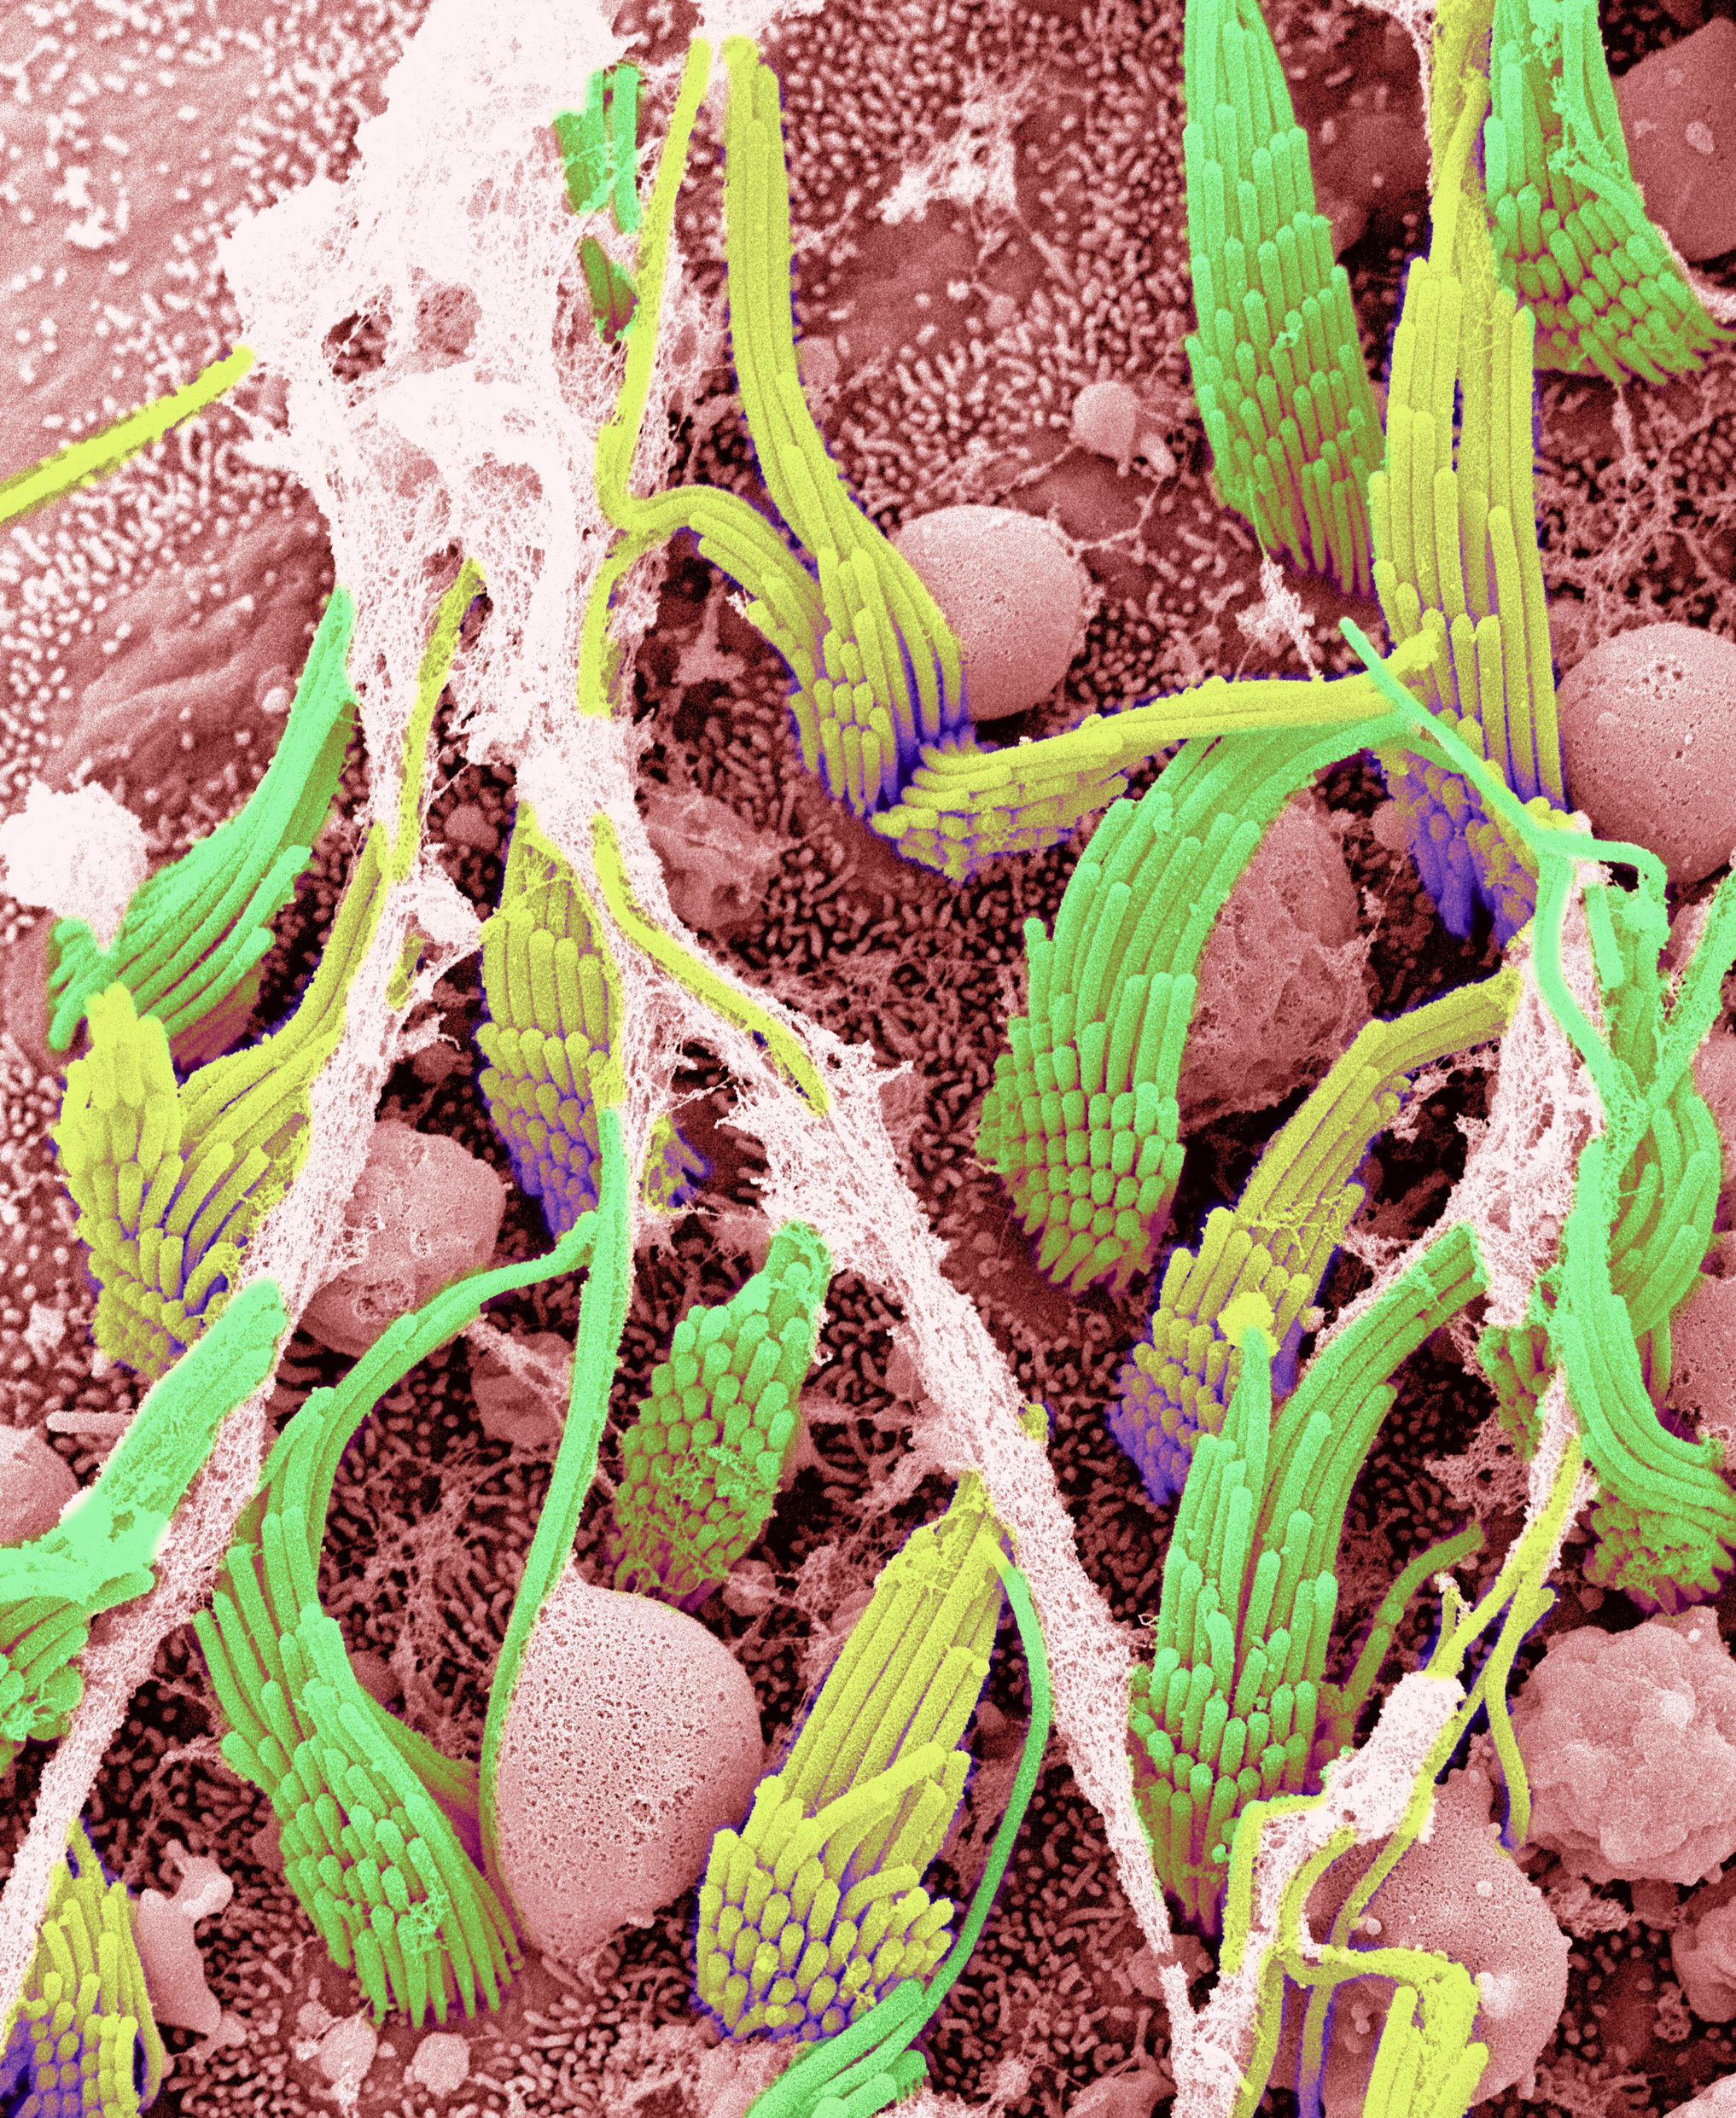 utricular hair cell bundles taken from a scanning electron microscope